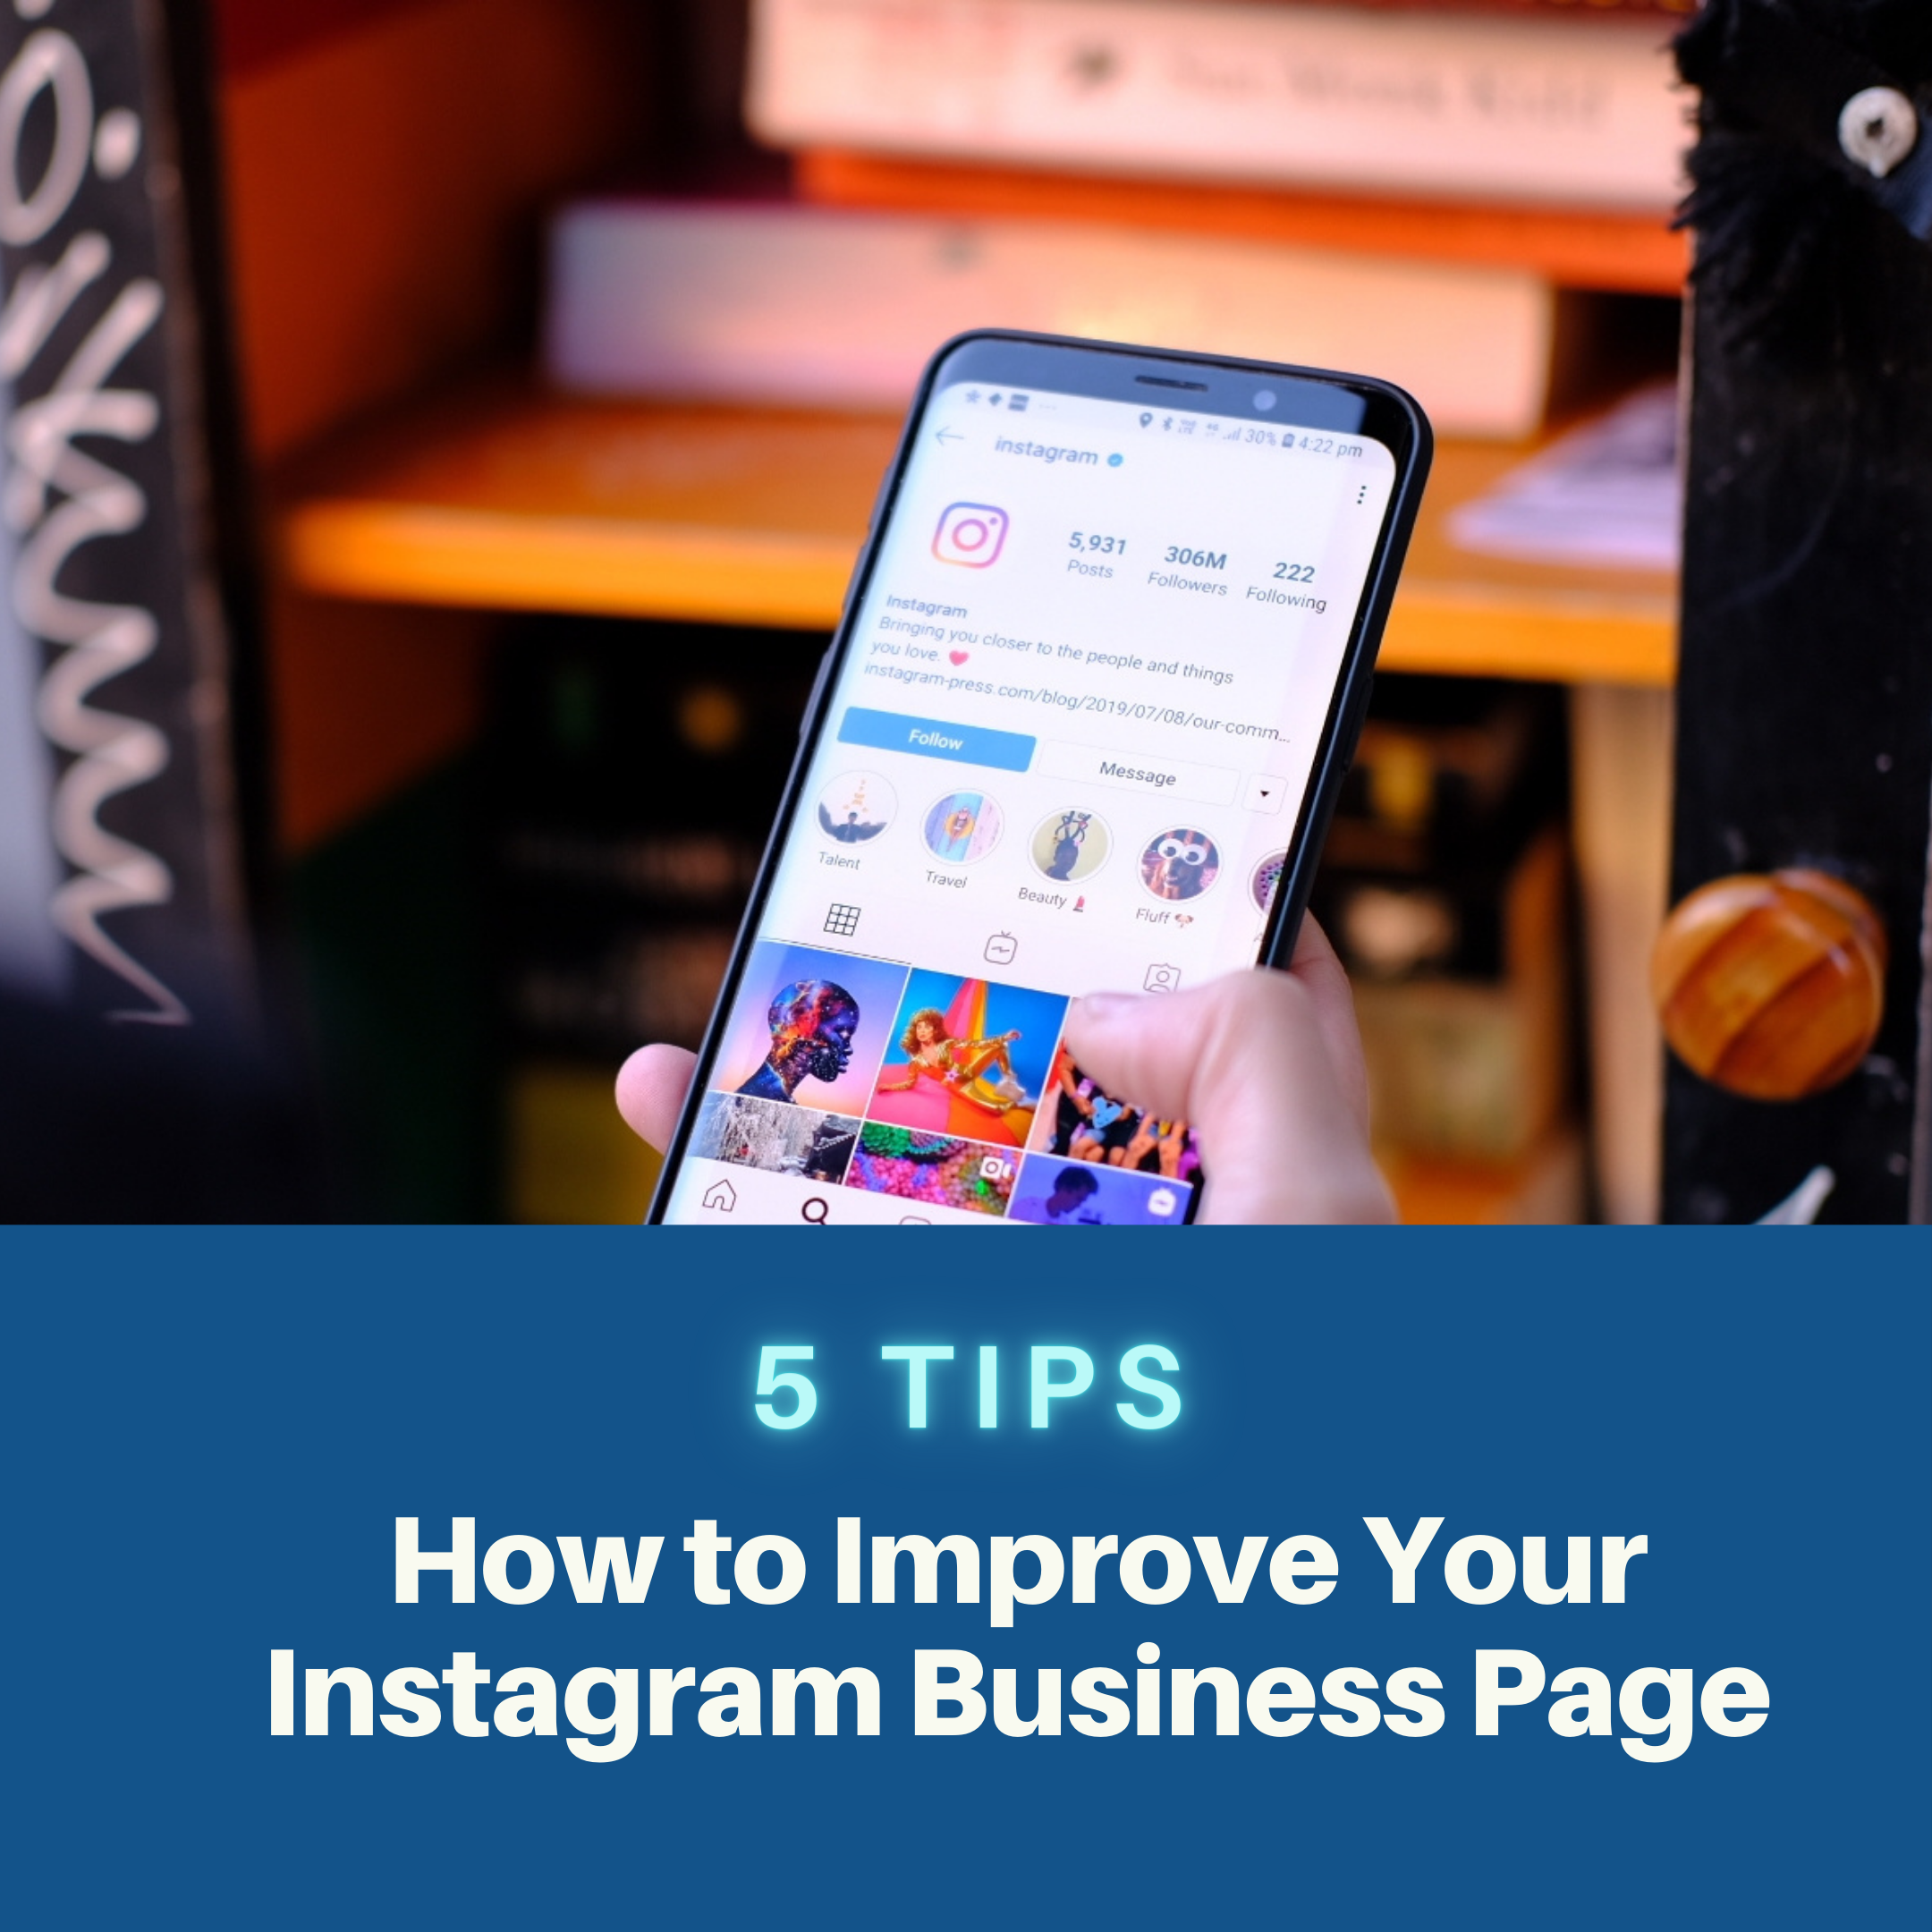 5 Tips on How To Improve Your Instagram Business Page